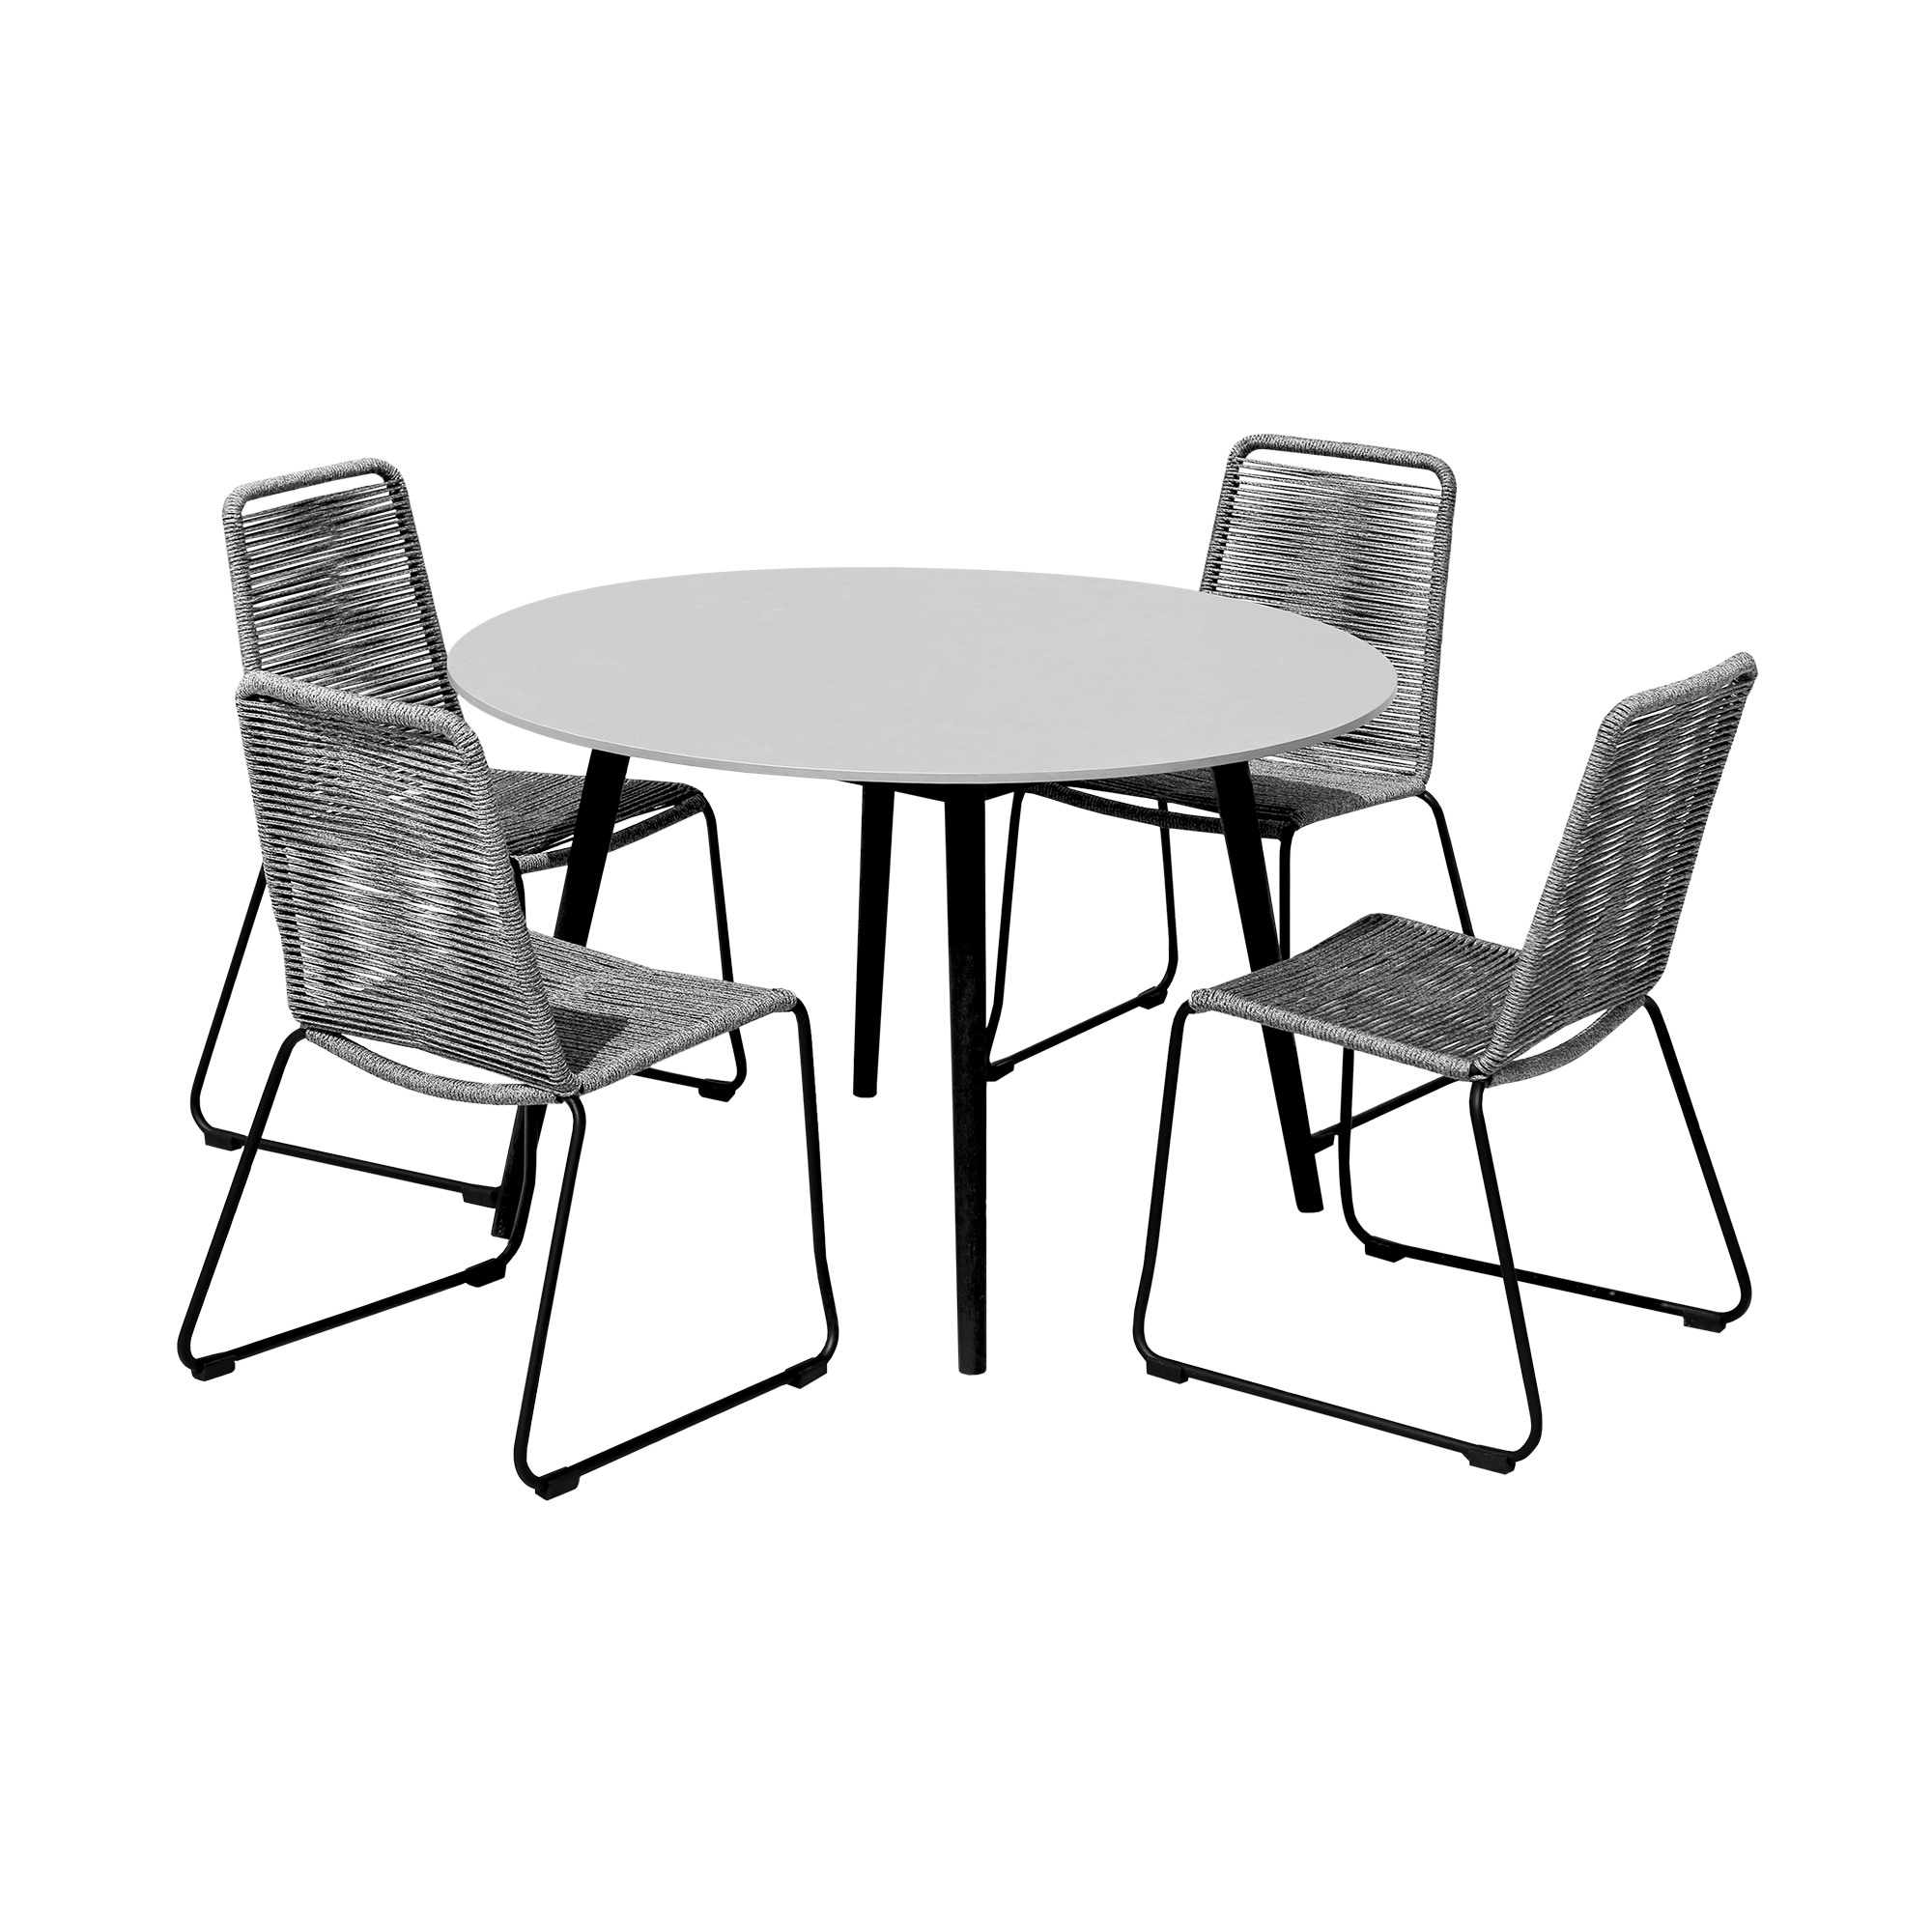 Sydney and Shasta 5 Piece Patio Outdoor Dining Set in Gray Rope with Black Eucalyptus Wood